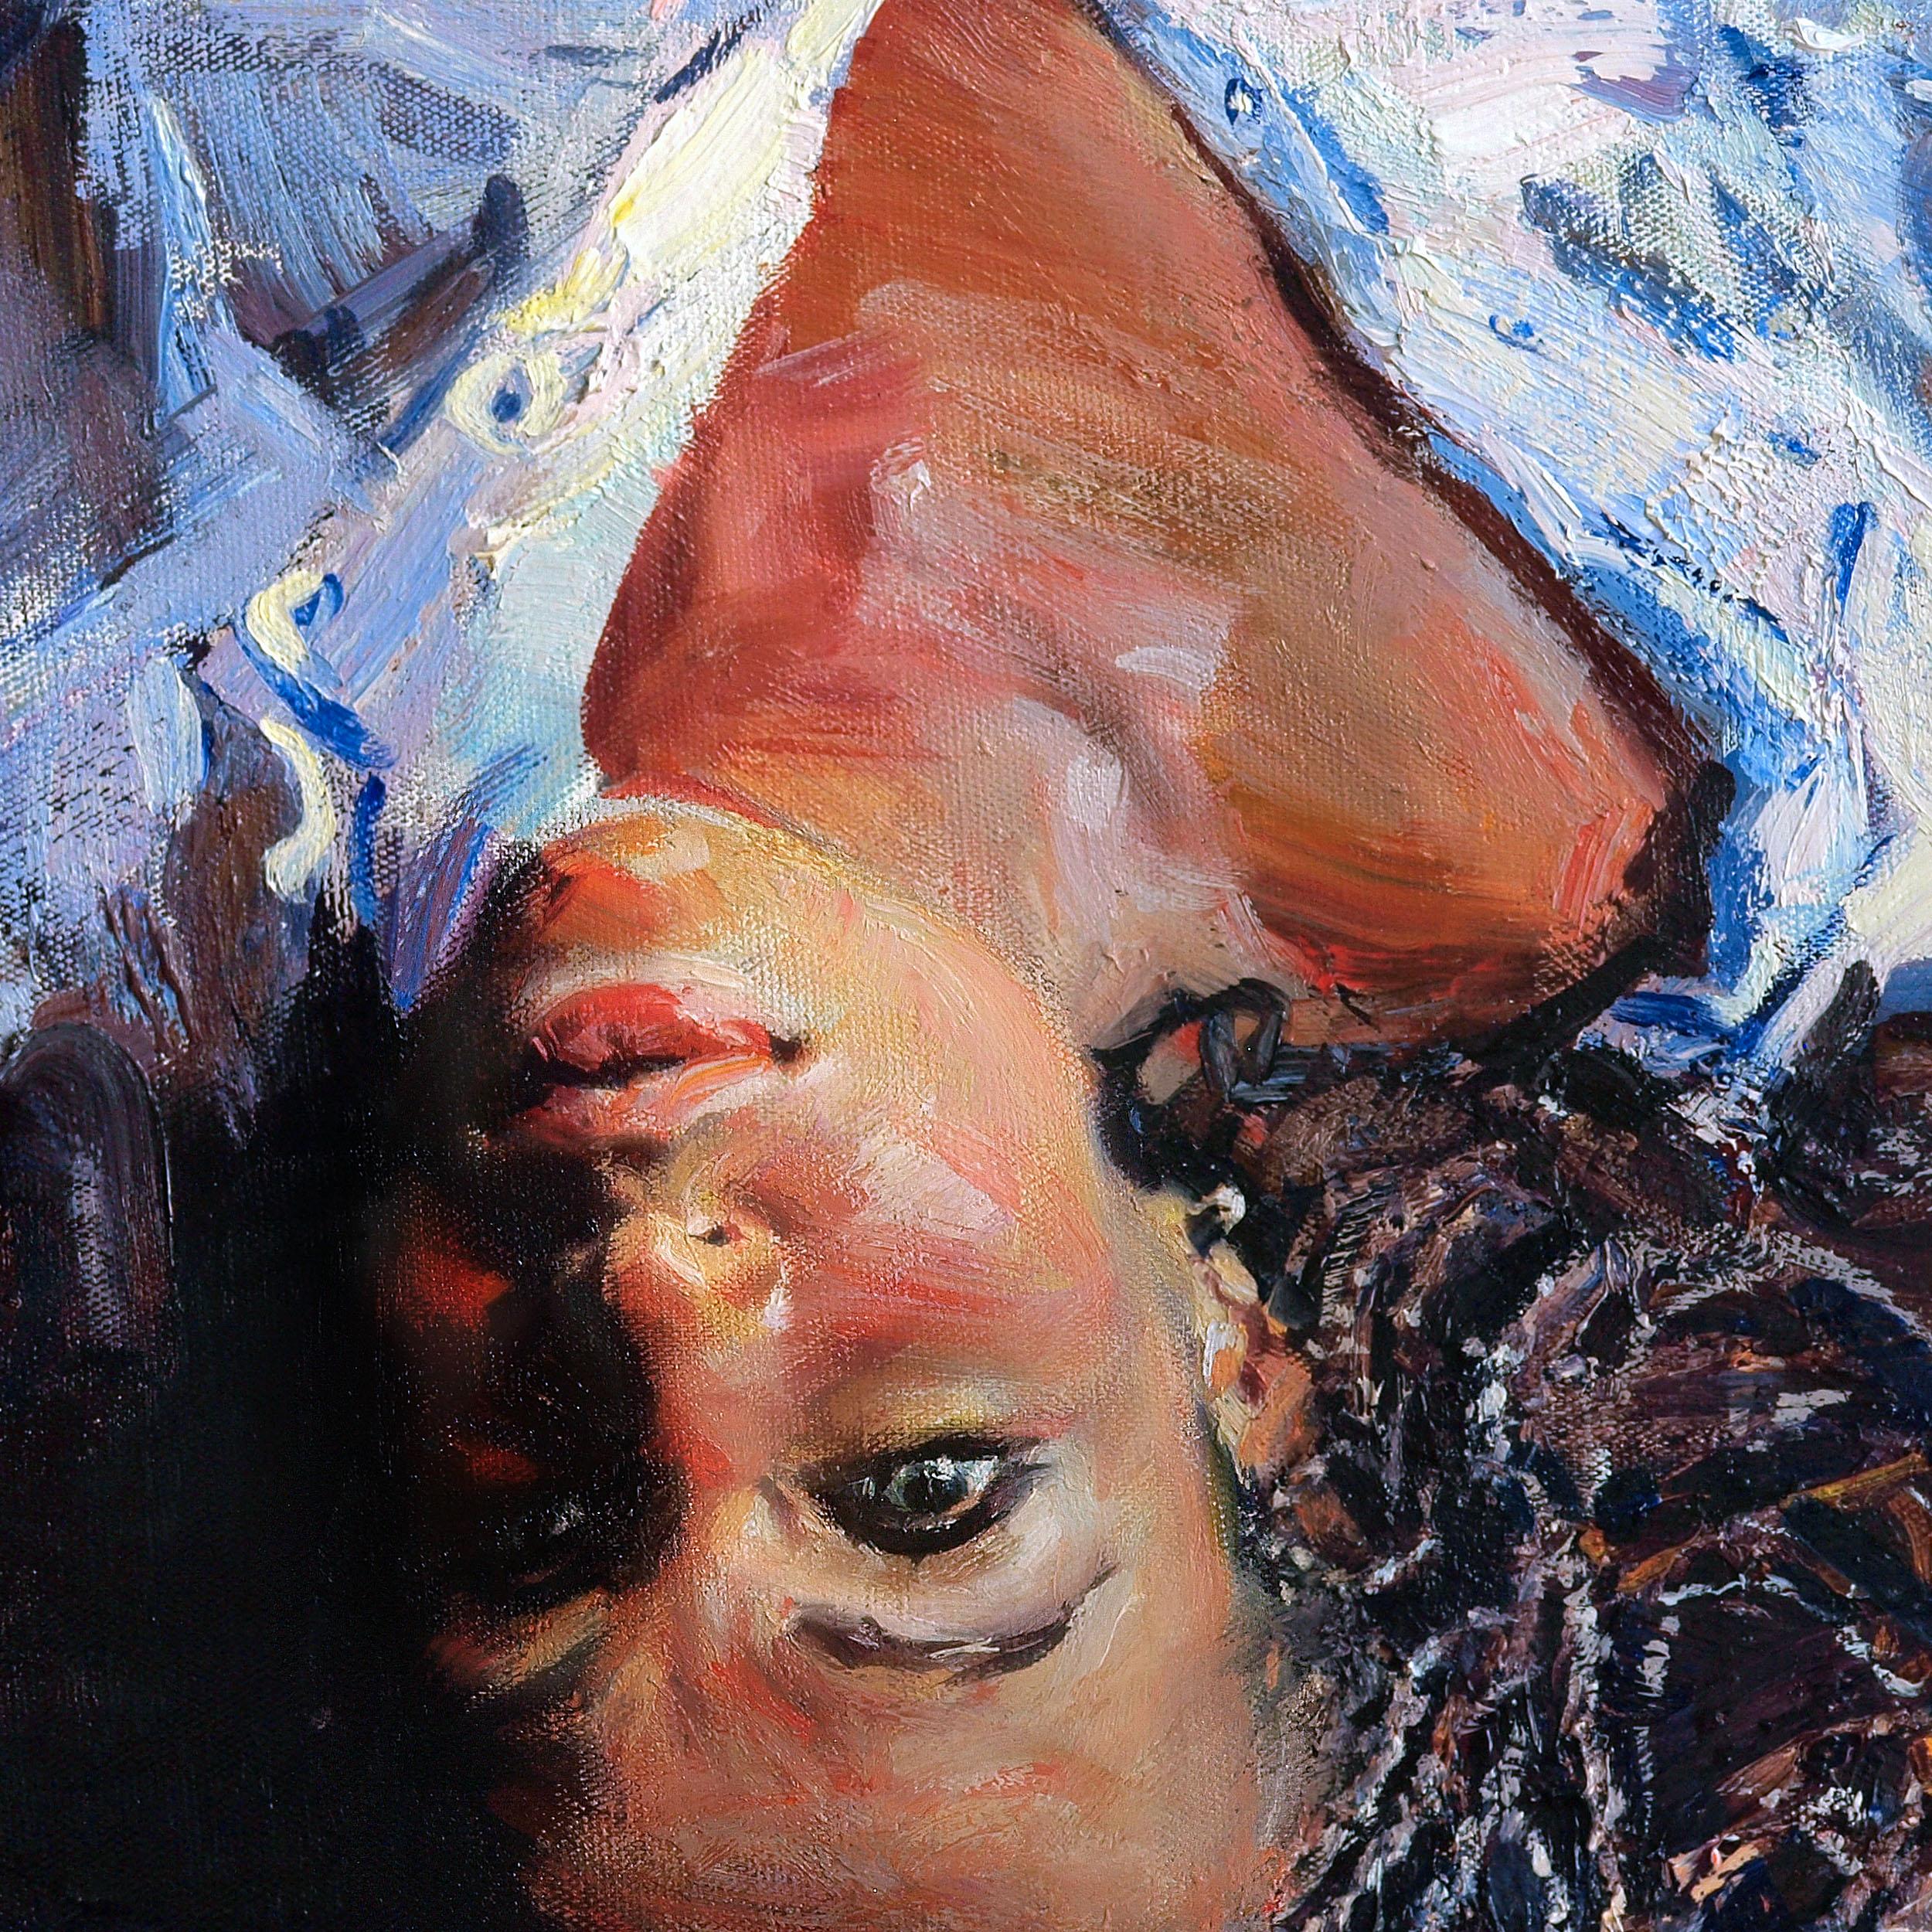 Upside down - Painting by Evgeniy Monahov